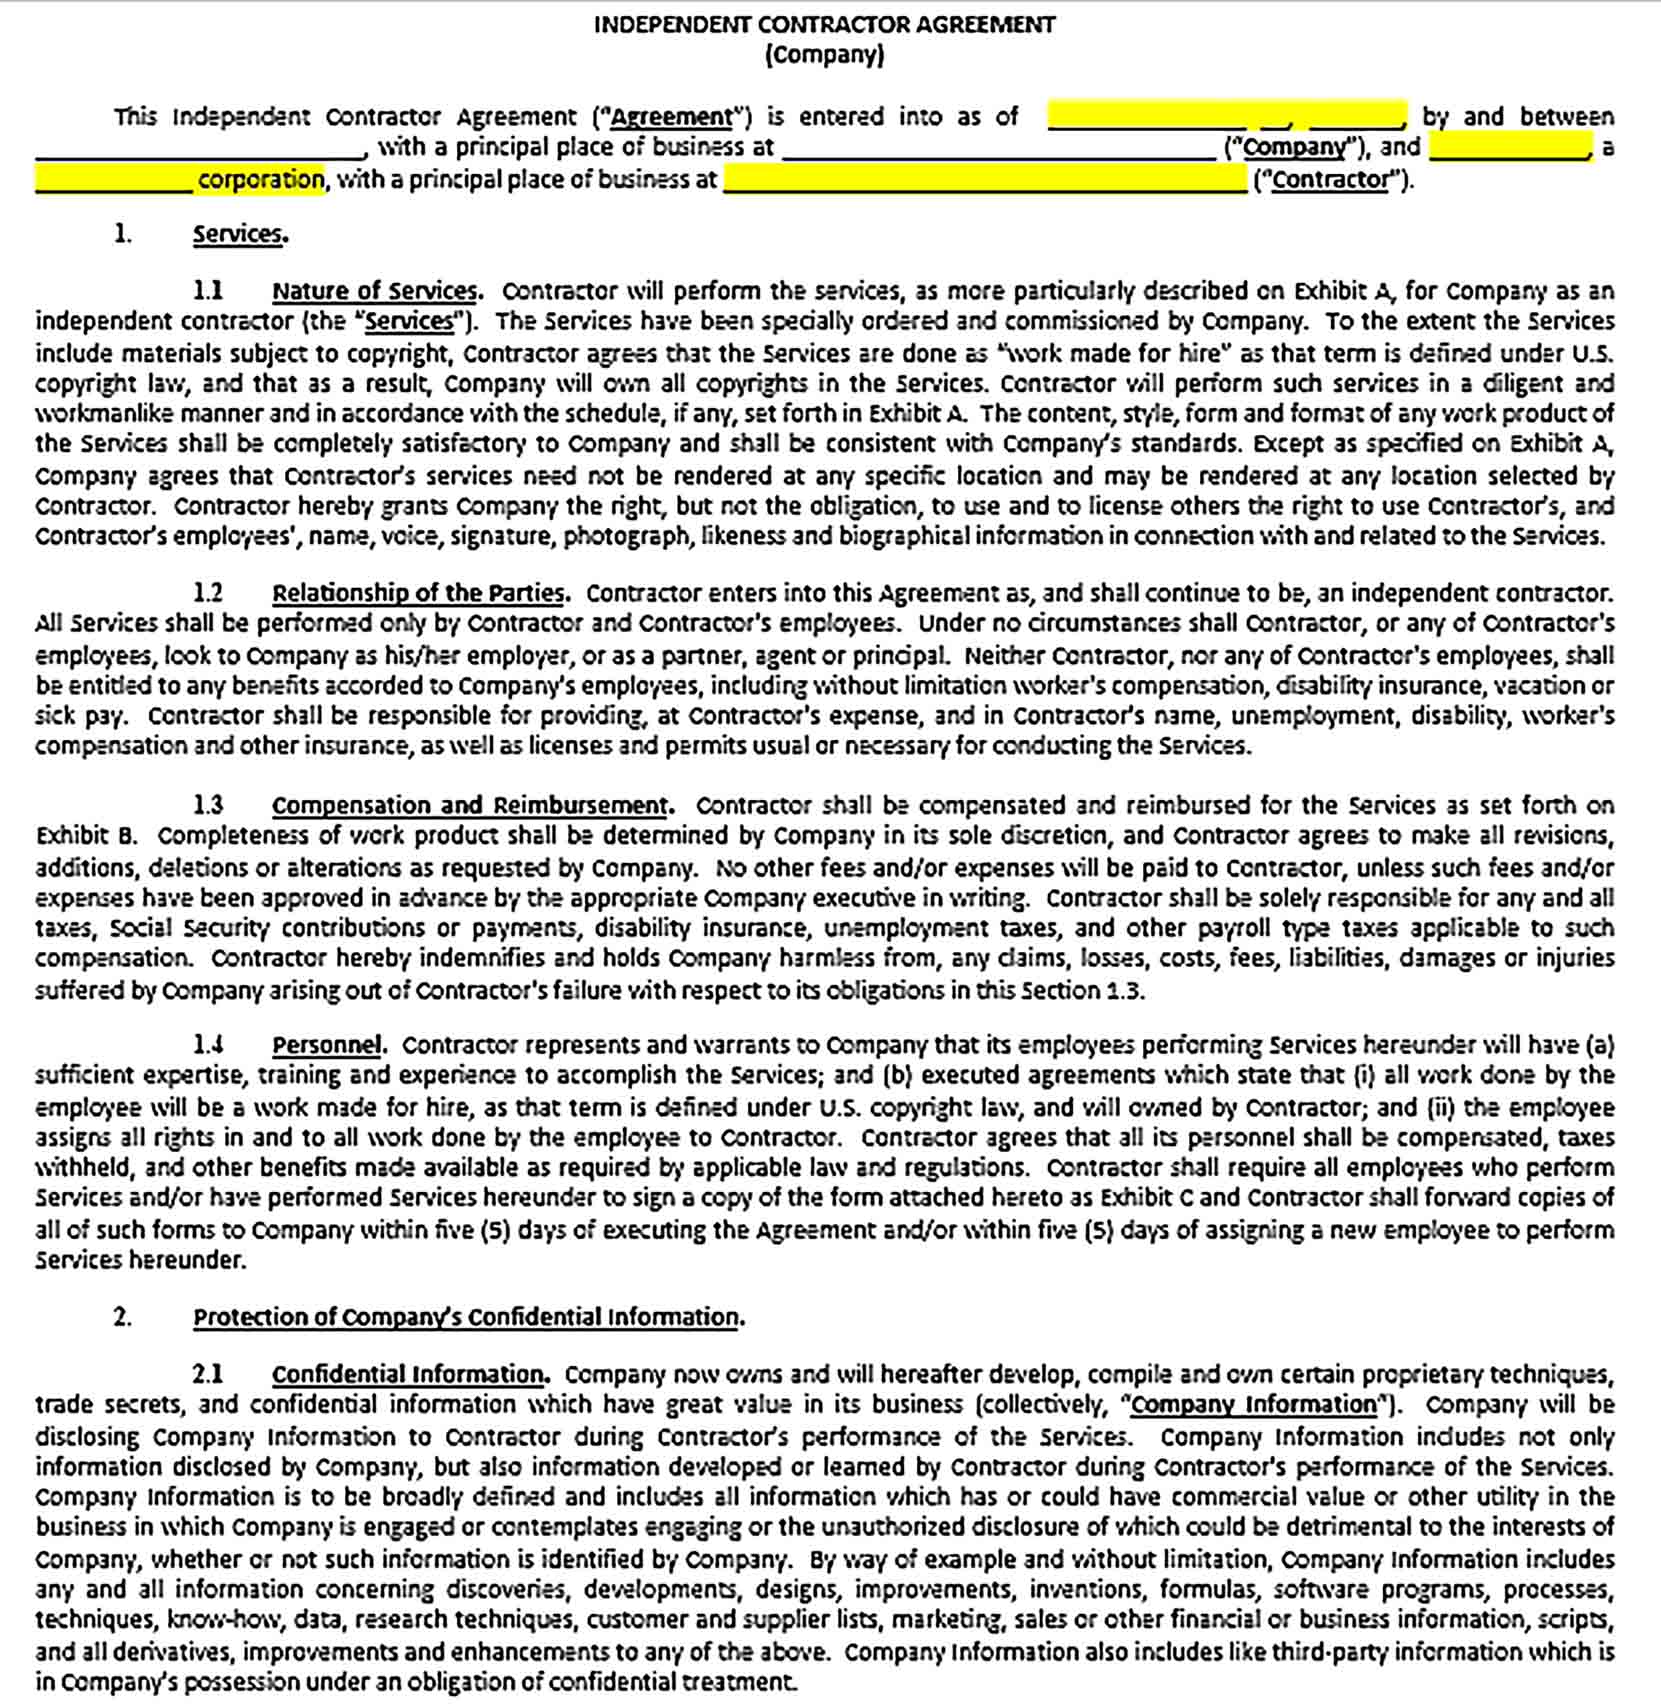 Sample Independent Contractor Agreement 001